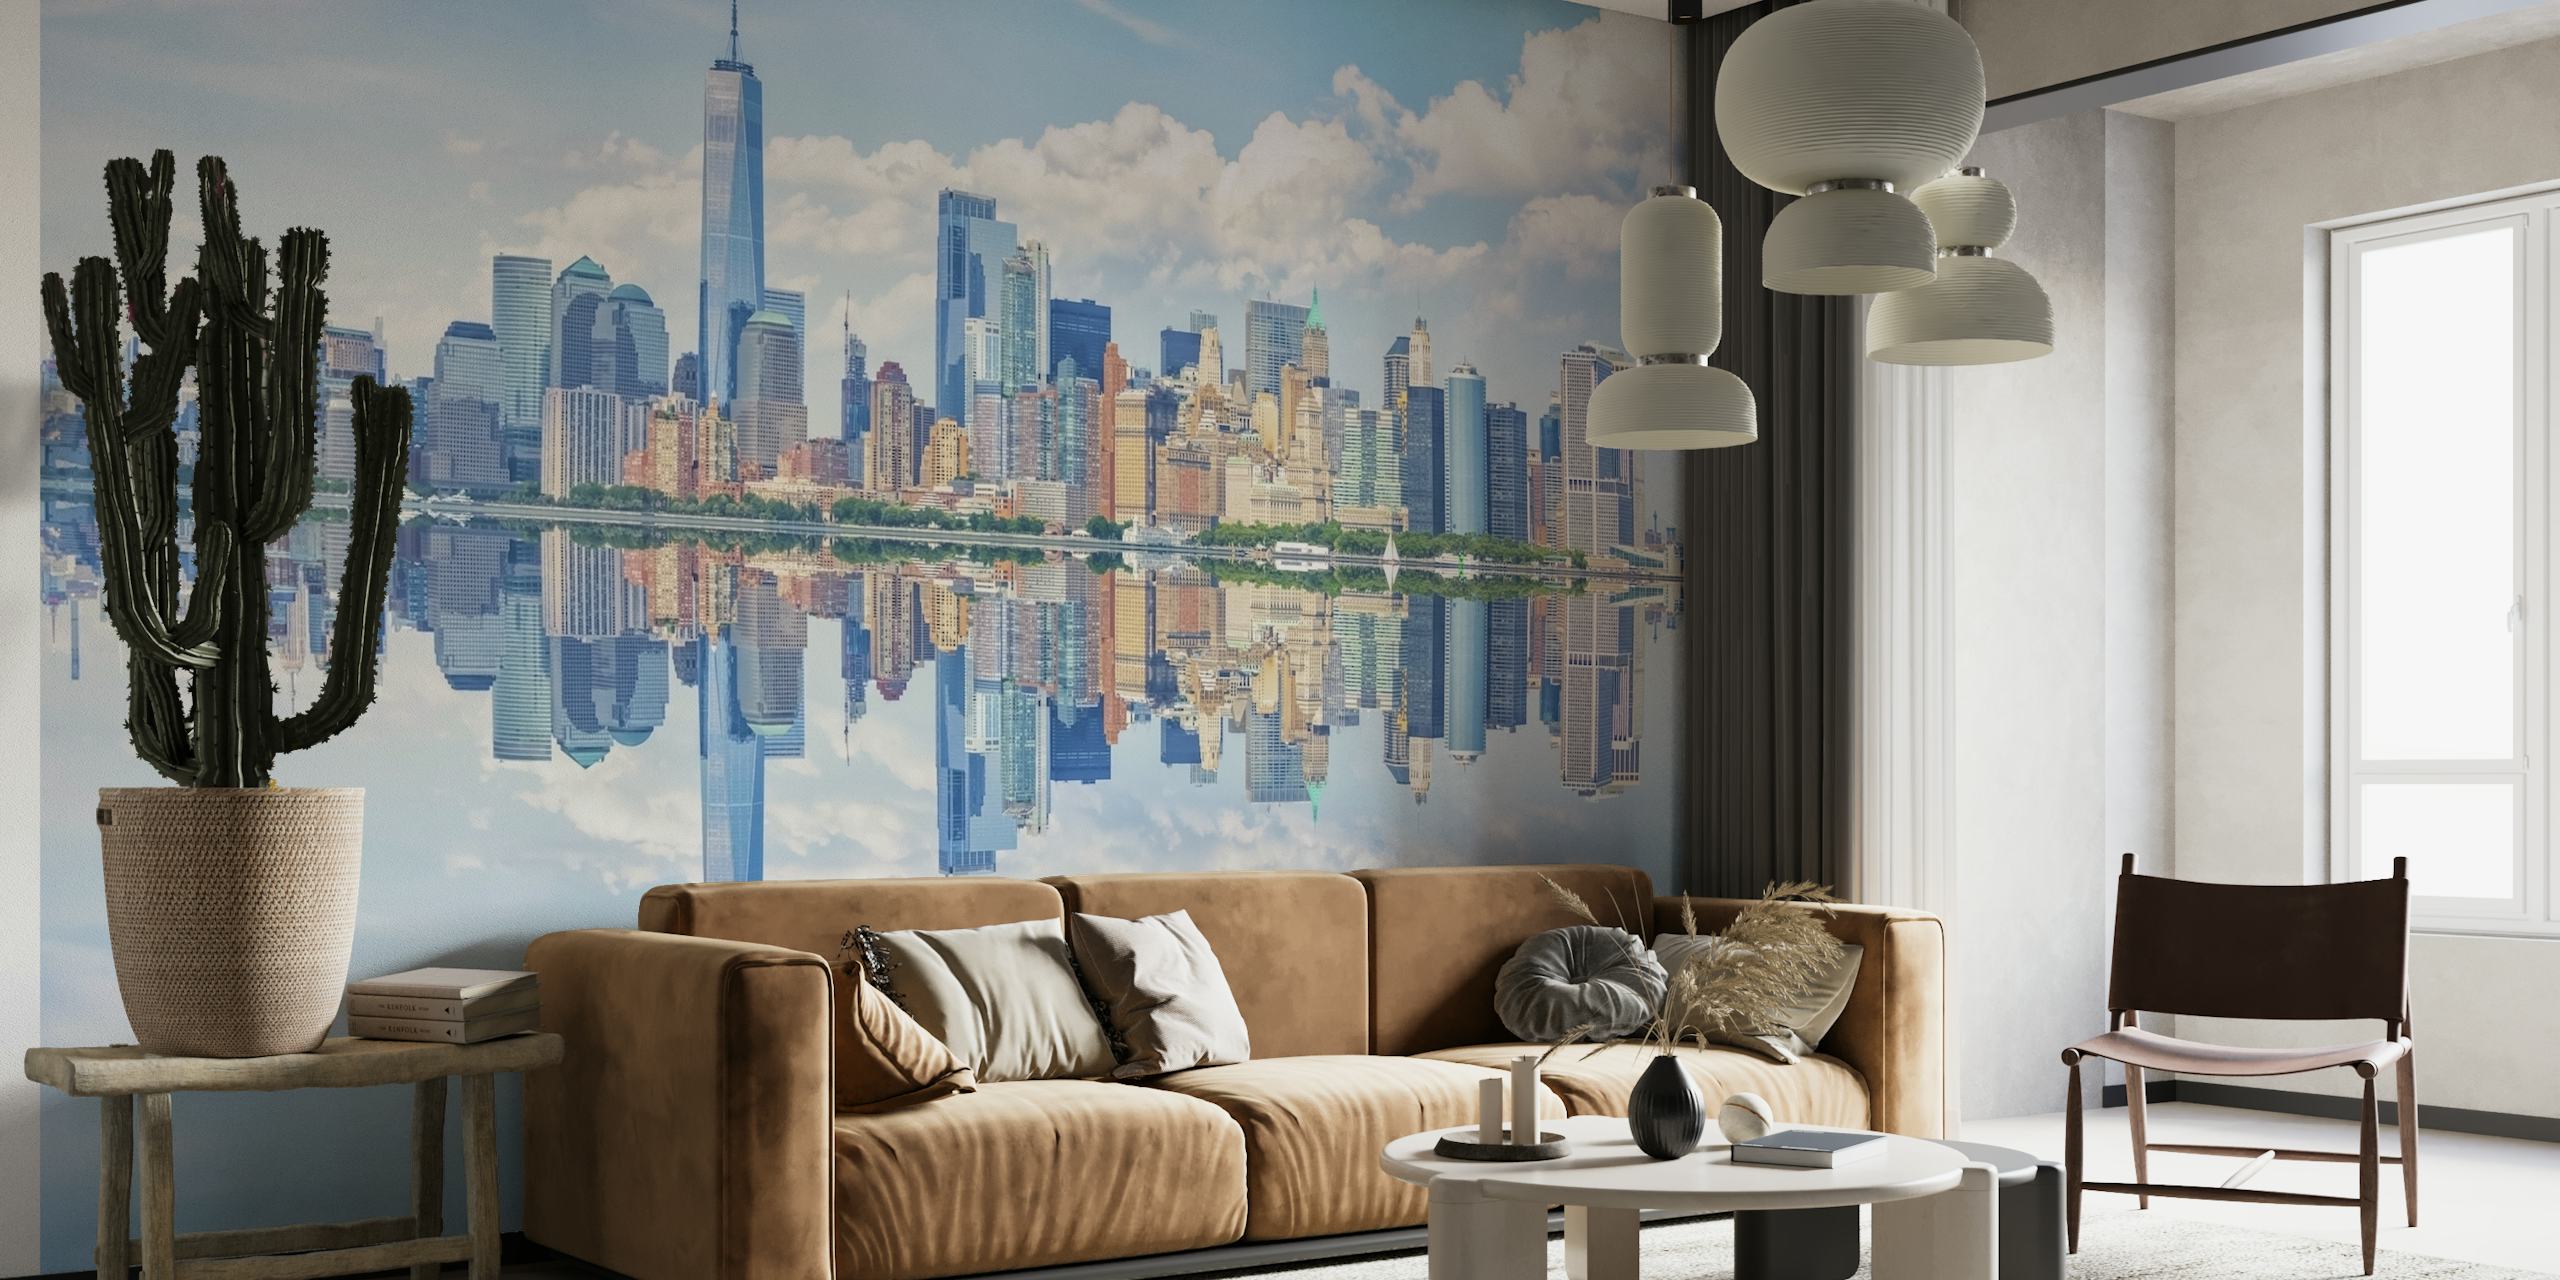 New York City skyline reflection wall mural with clear blue skies and tranquil water